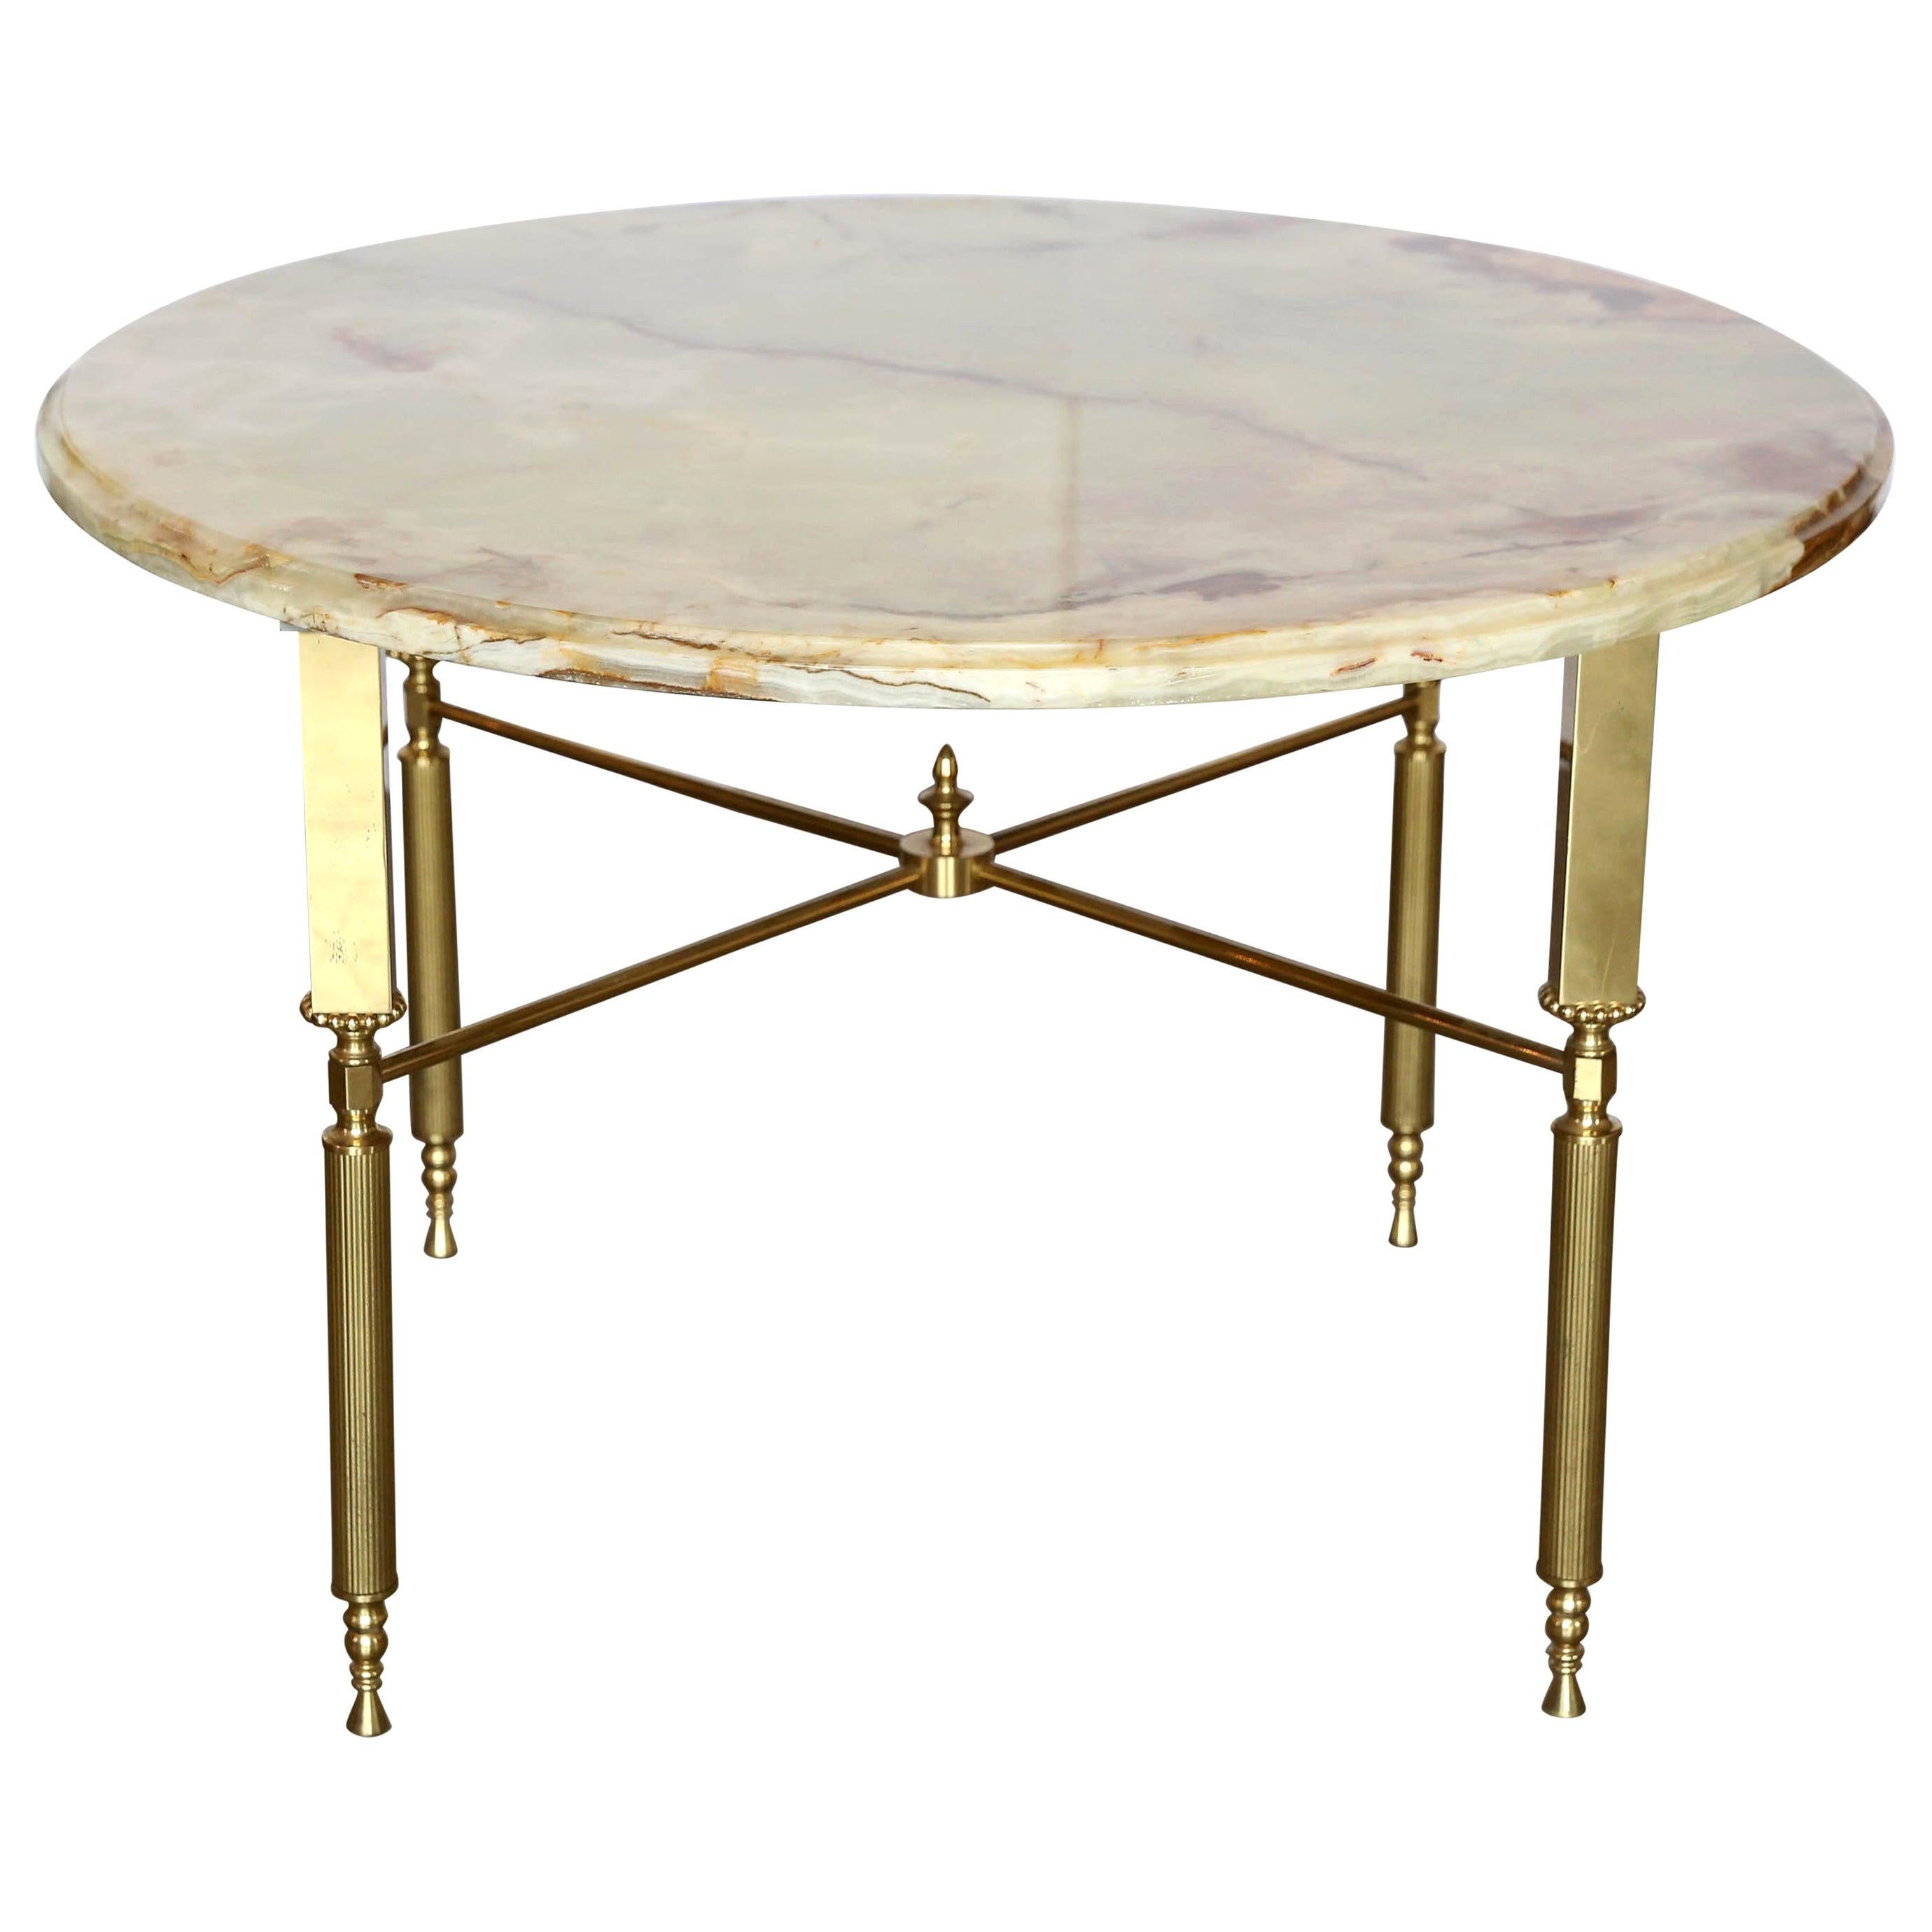 Neoclassical Maison Jansen Orange & Cream Onyx and Brass Side or Cocktail Table For Sale